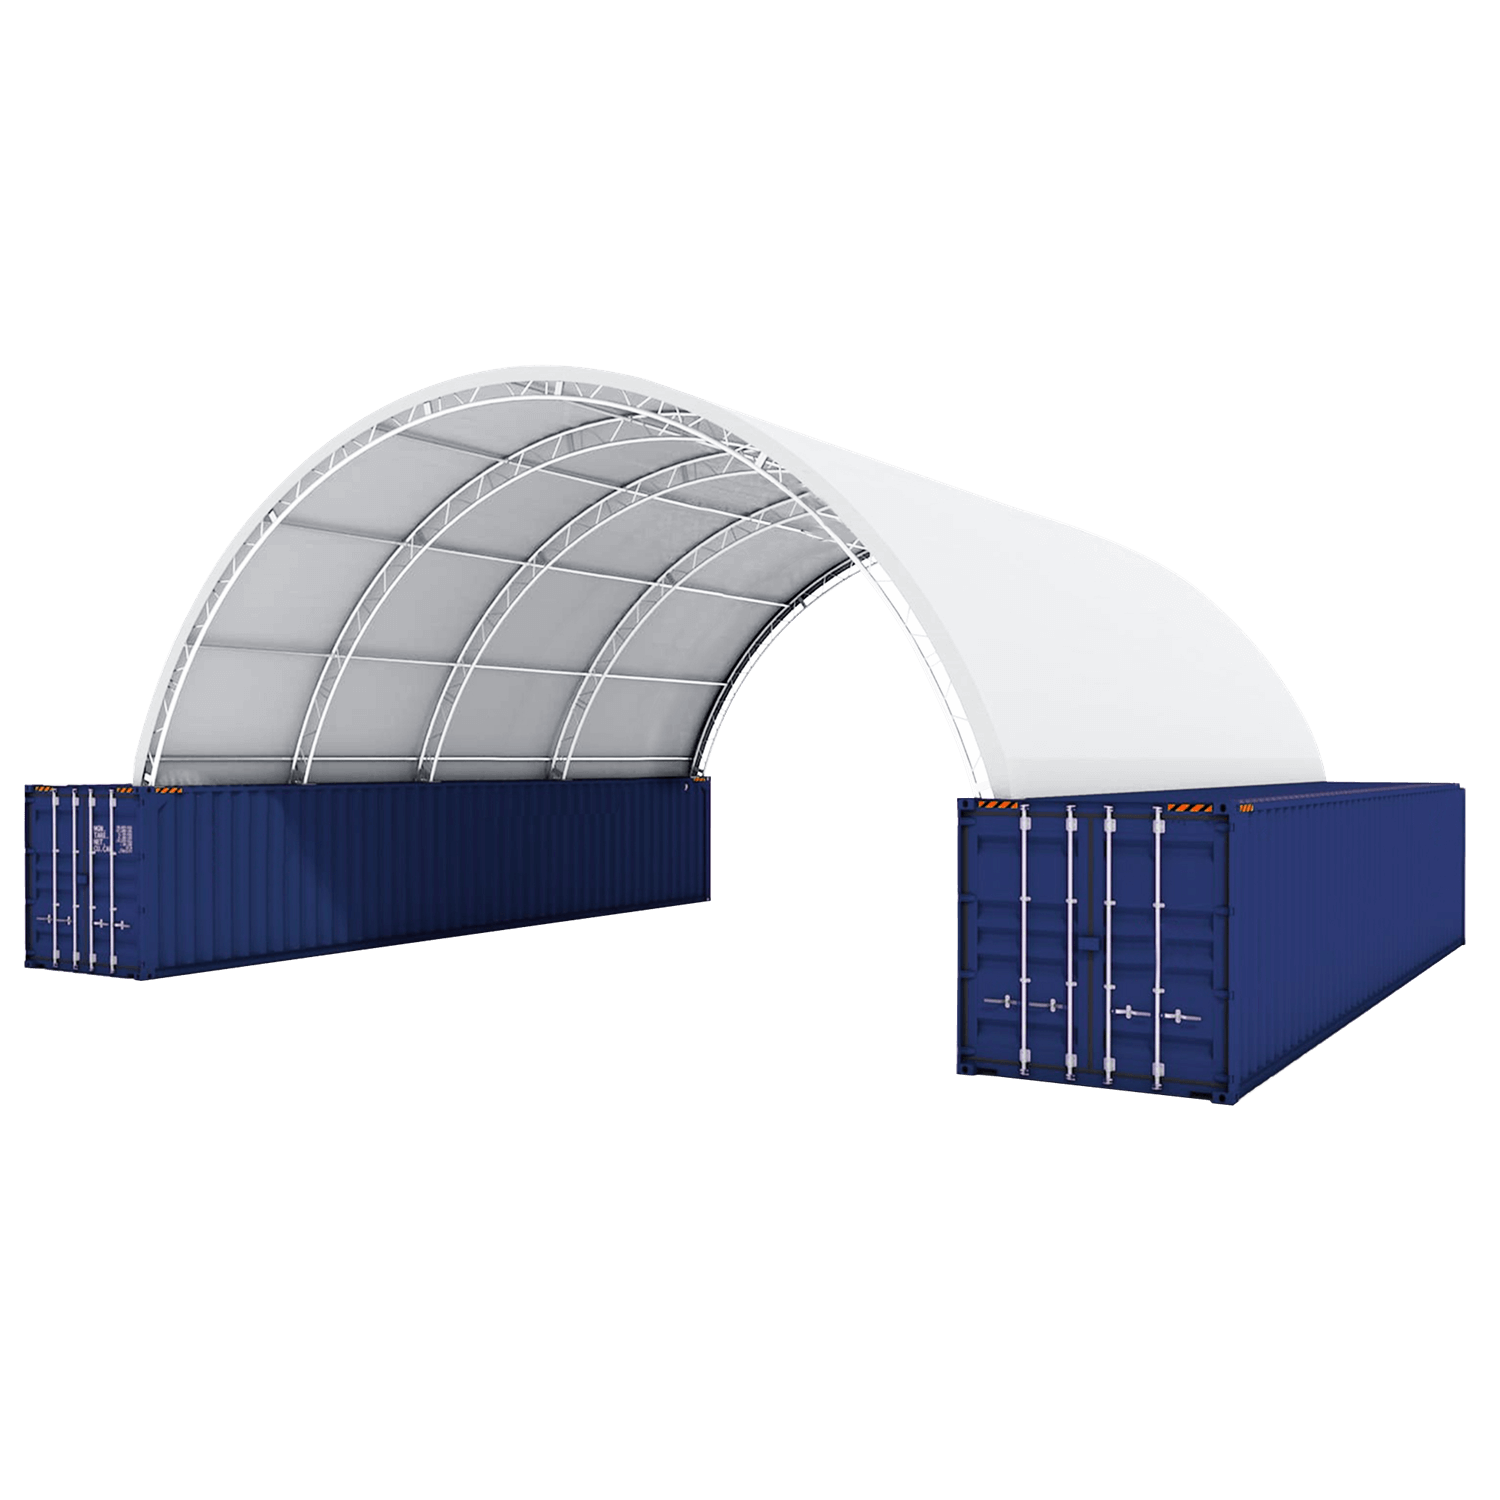 Gold Mountain Shipping Container Canopy Shelter Double Truss 40'x40'x15'